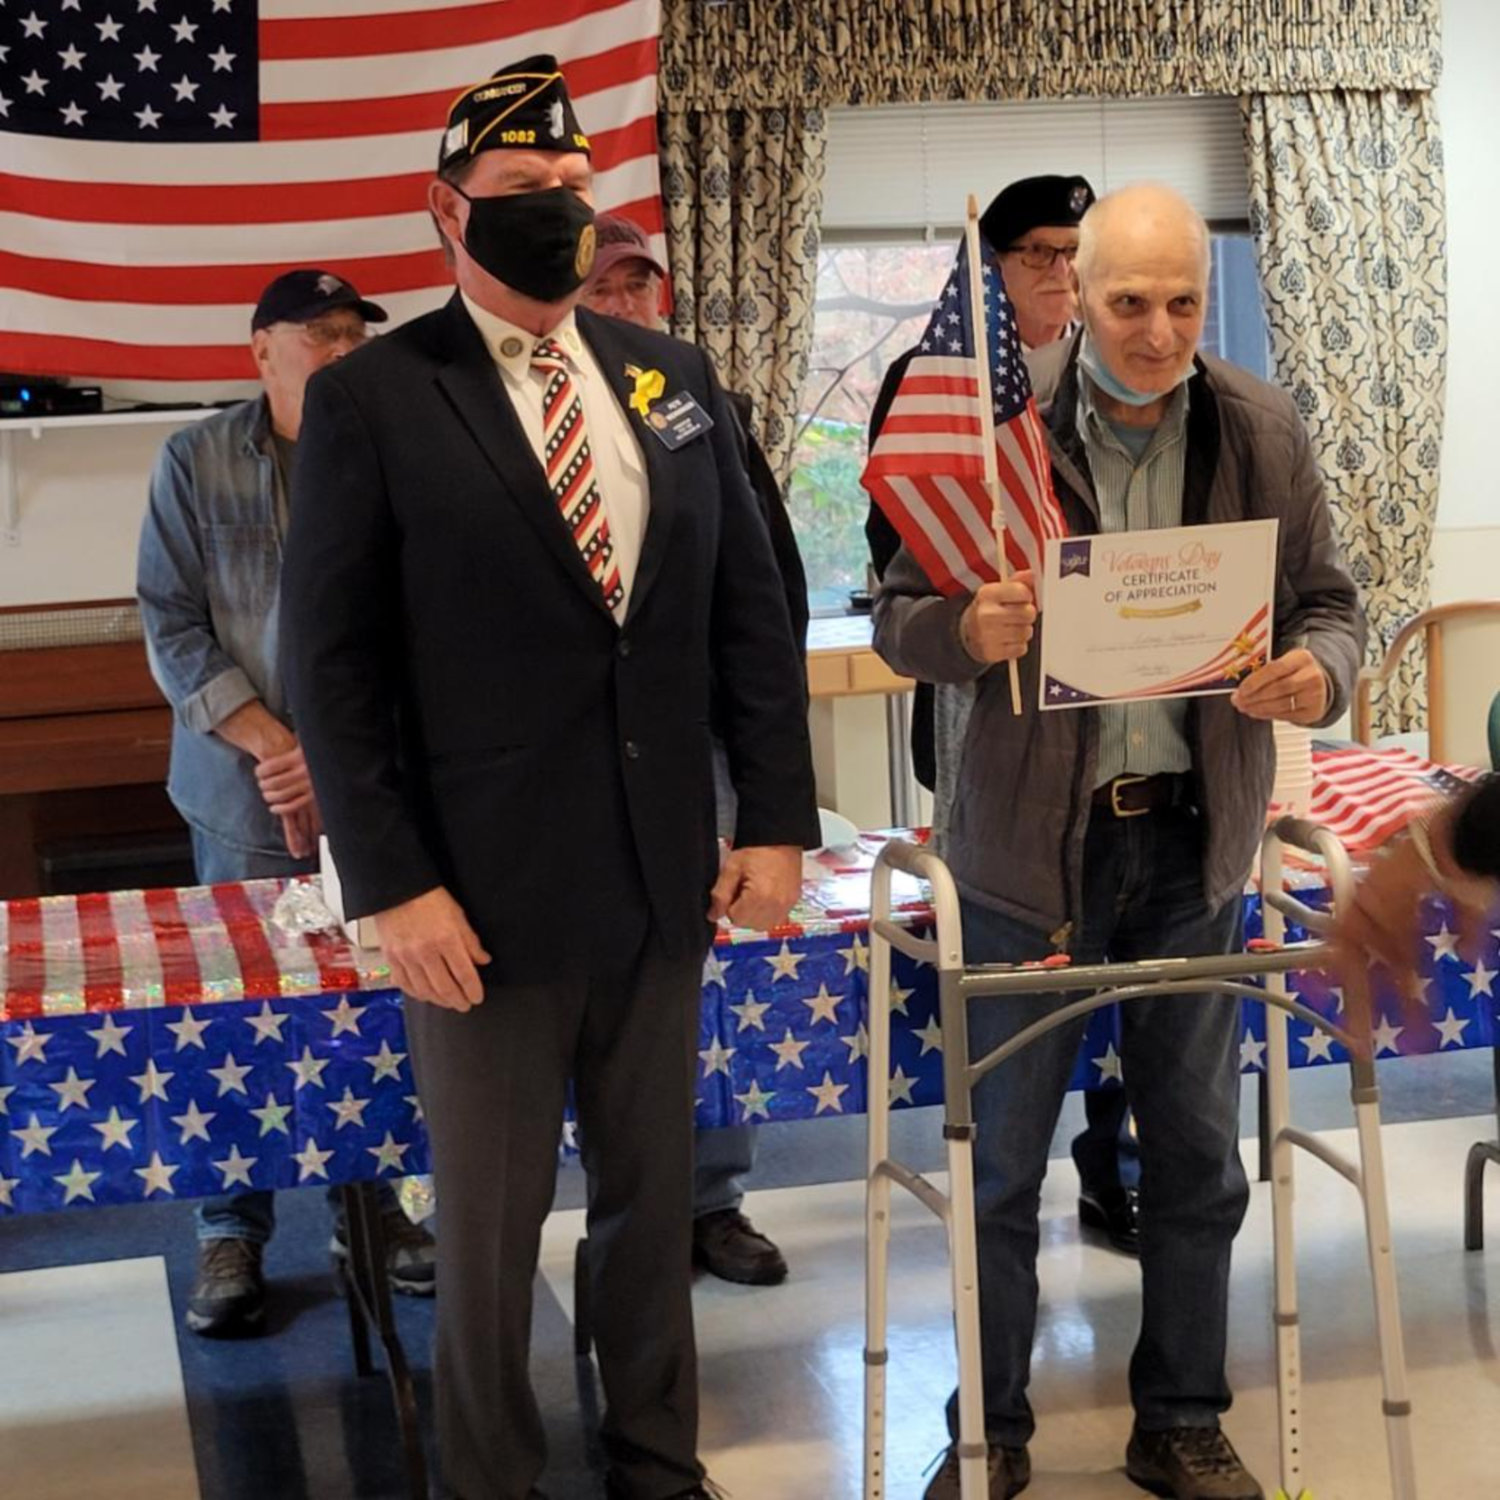 Pete Wenninger from the East Meadow American Legion Post 1082 visited veterans at the Fulton Commons Care Center in East Meadow. He spoke with veterans and they each got a certificate of appreciation.